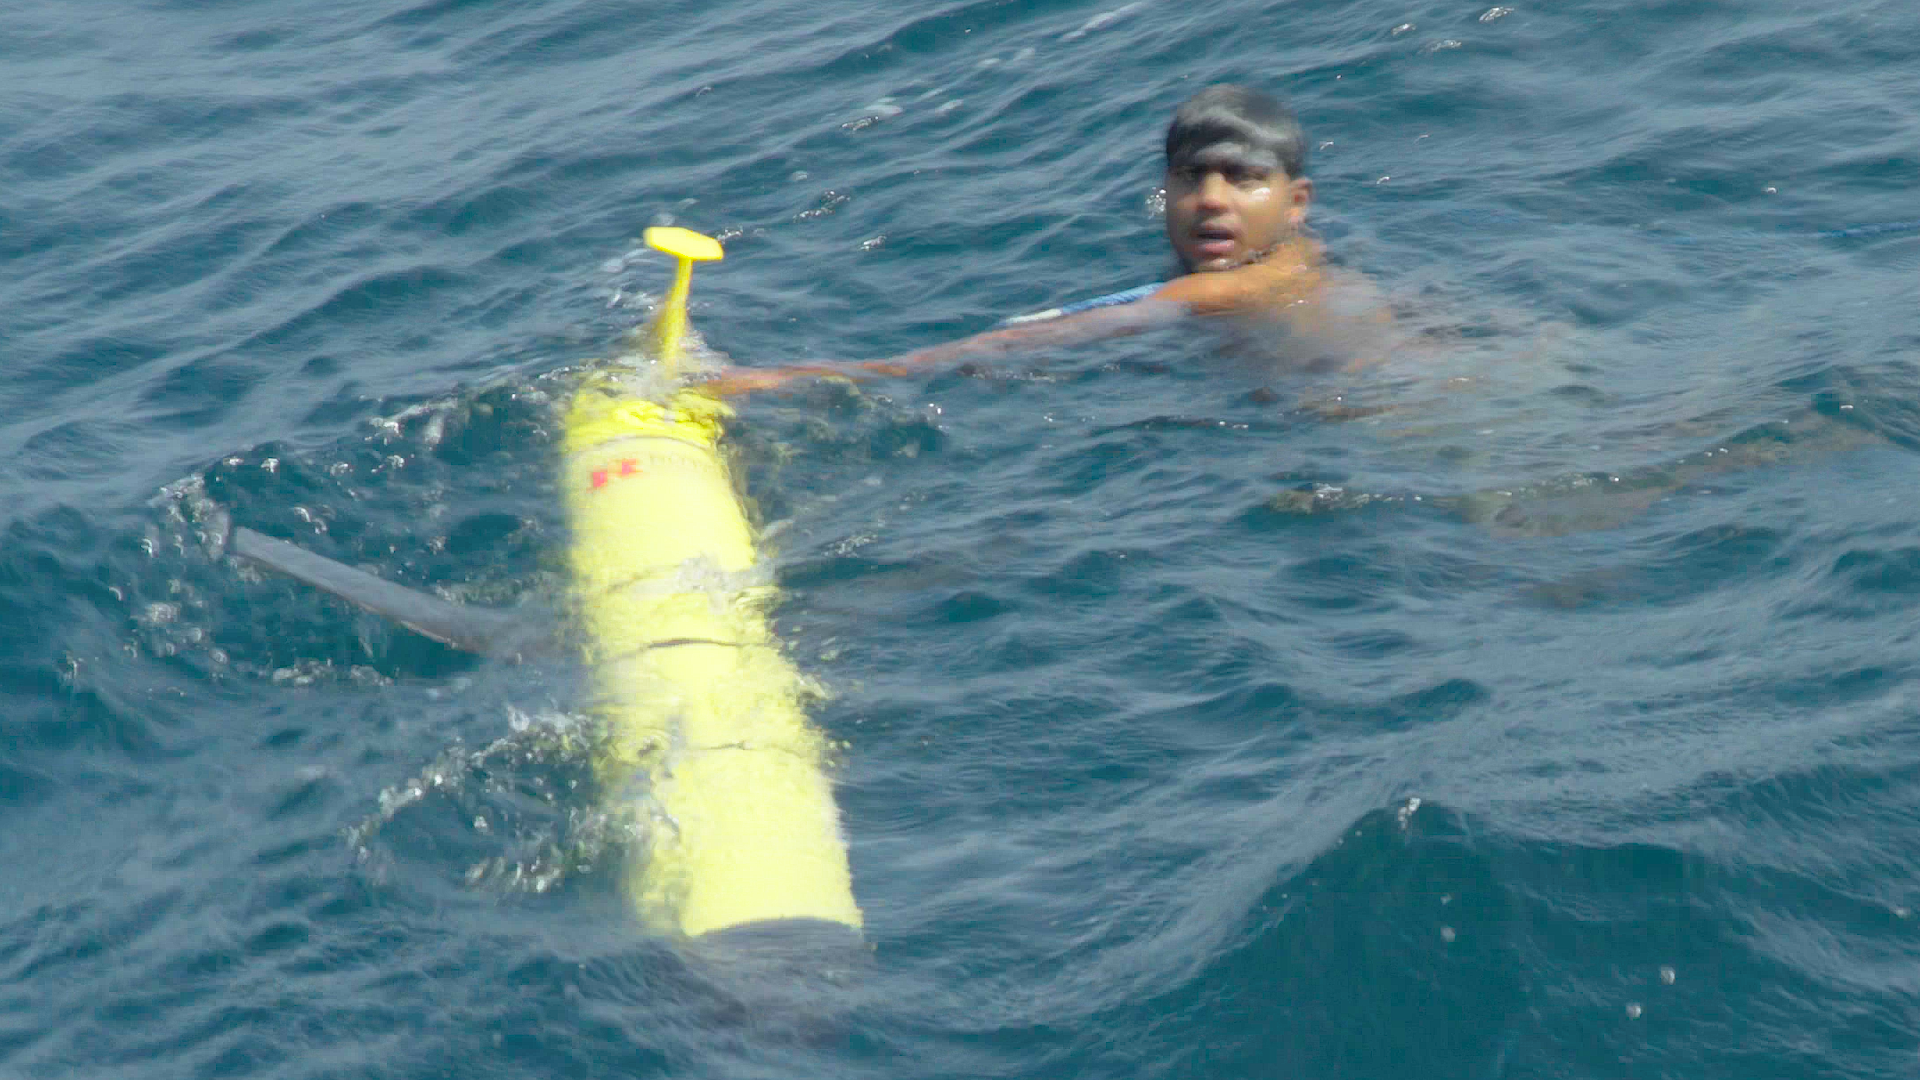 A swimmer from the Sri Lankan recovery vessel is the first to touch RU29 on September 30, 2017 after 330 days at sea.